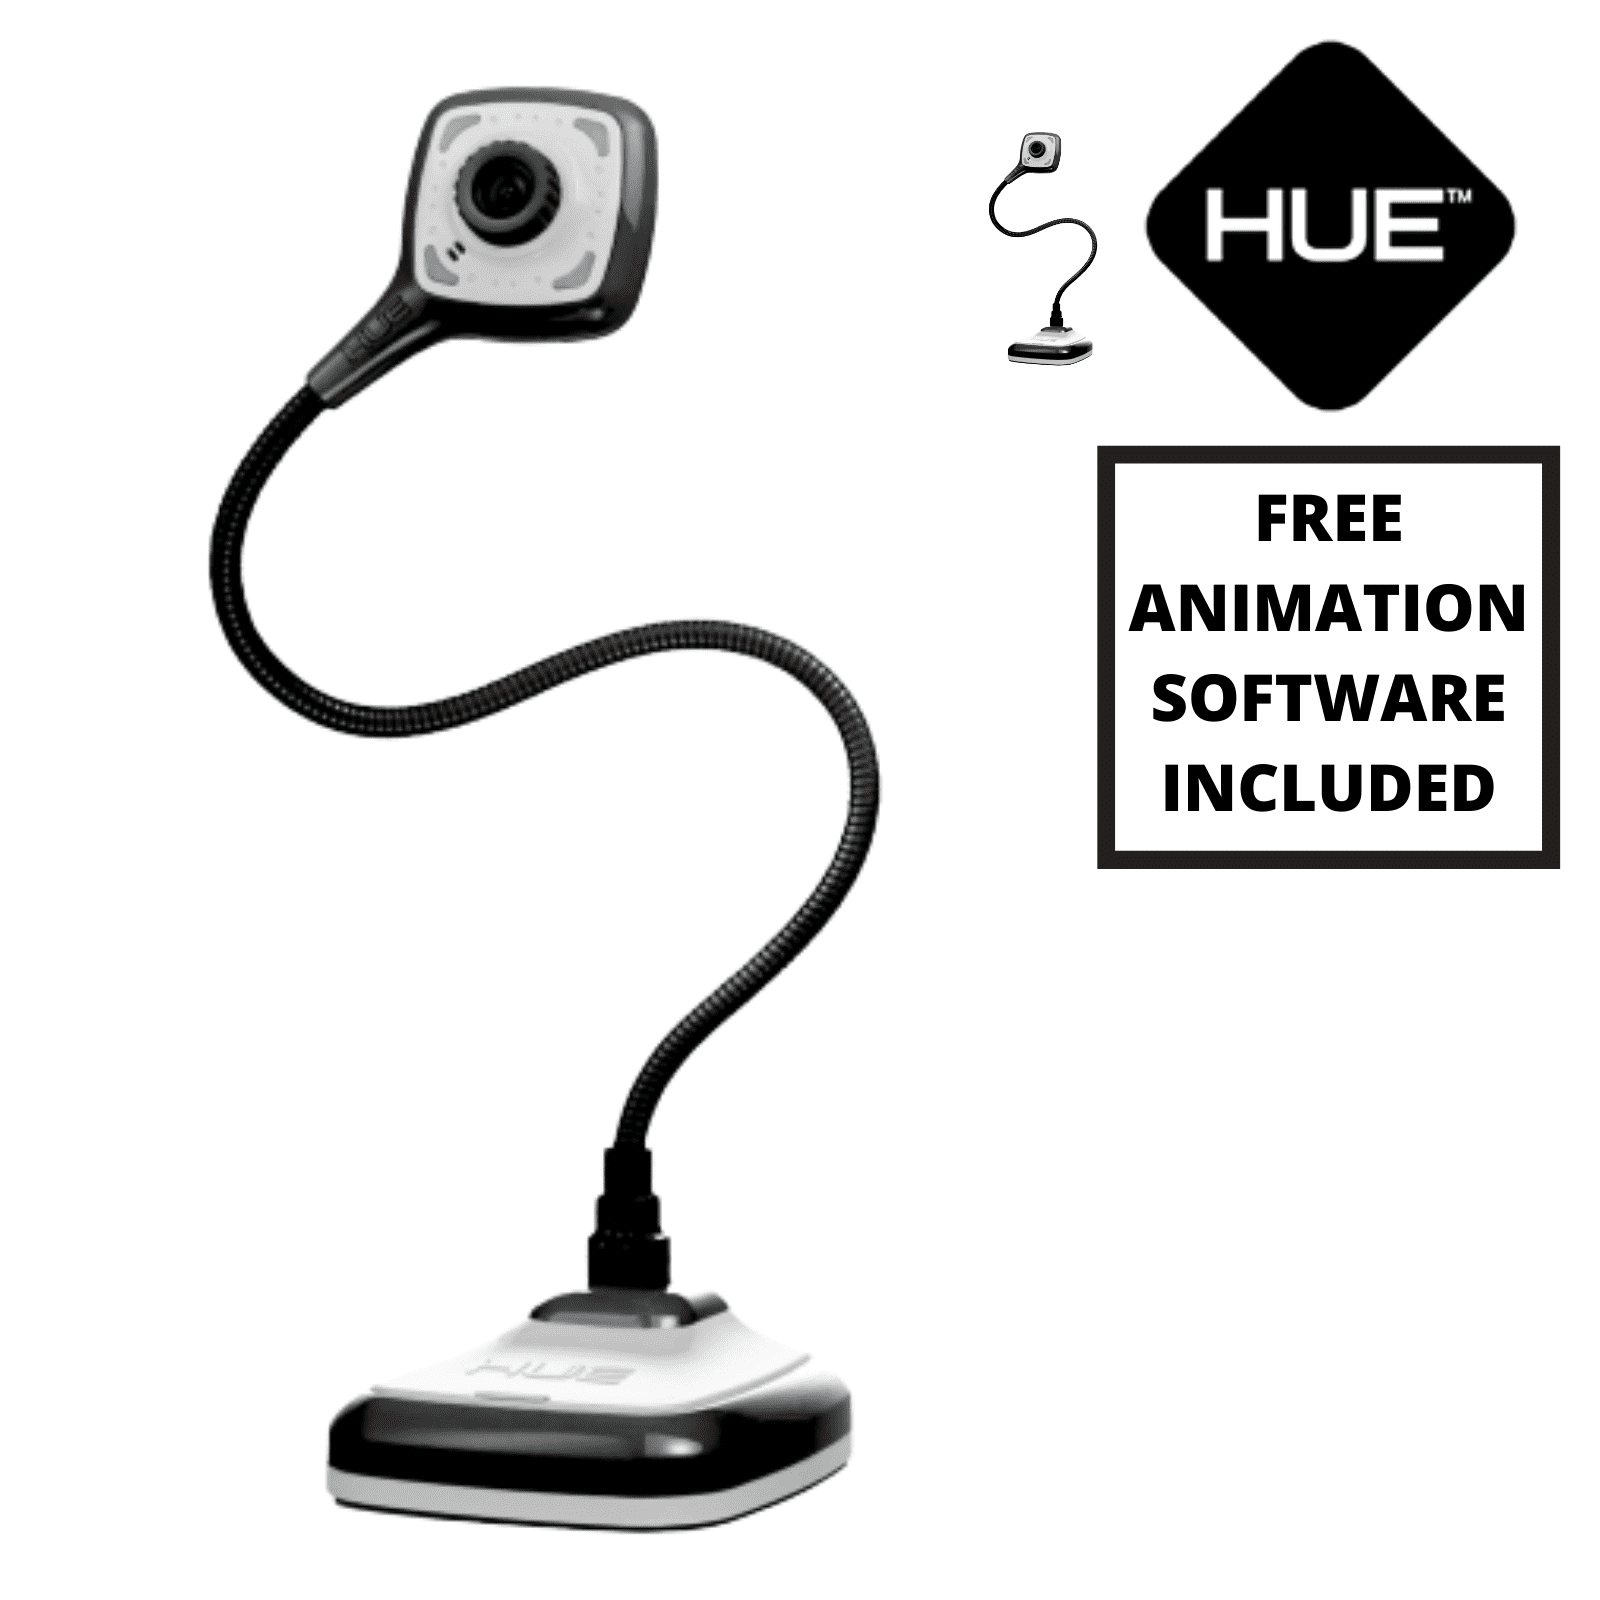 Hue HD Pro USB Camera – Document Camera for Windows, macOs and Chrome OS  with Motion Animation Kit, Wireless Webcam and Class Room Camera (Black) |  4k Classroom Visual Presenter with Flexible